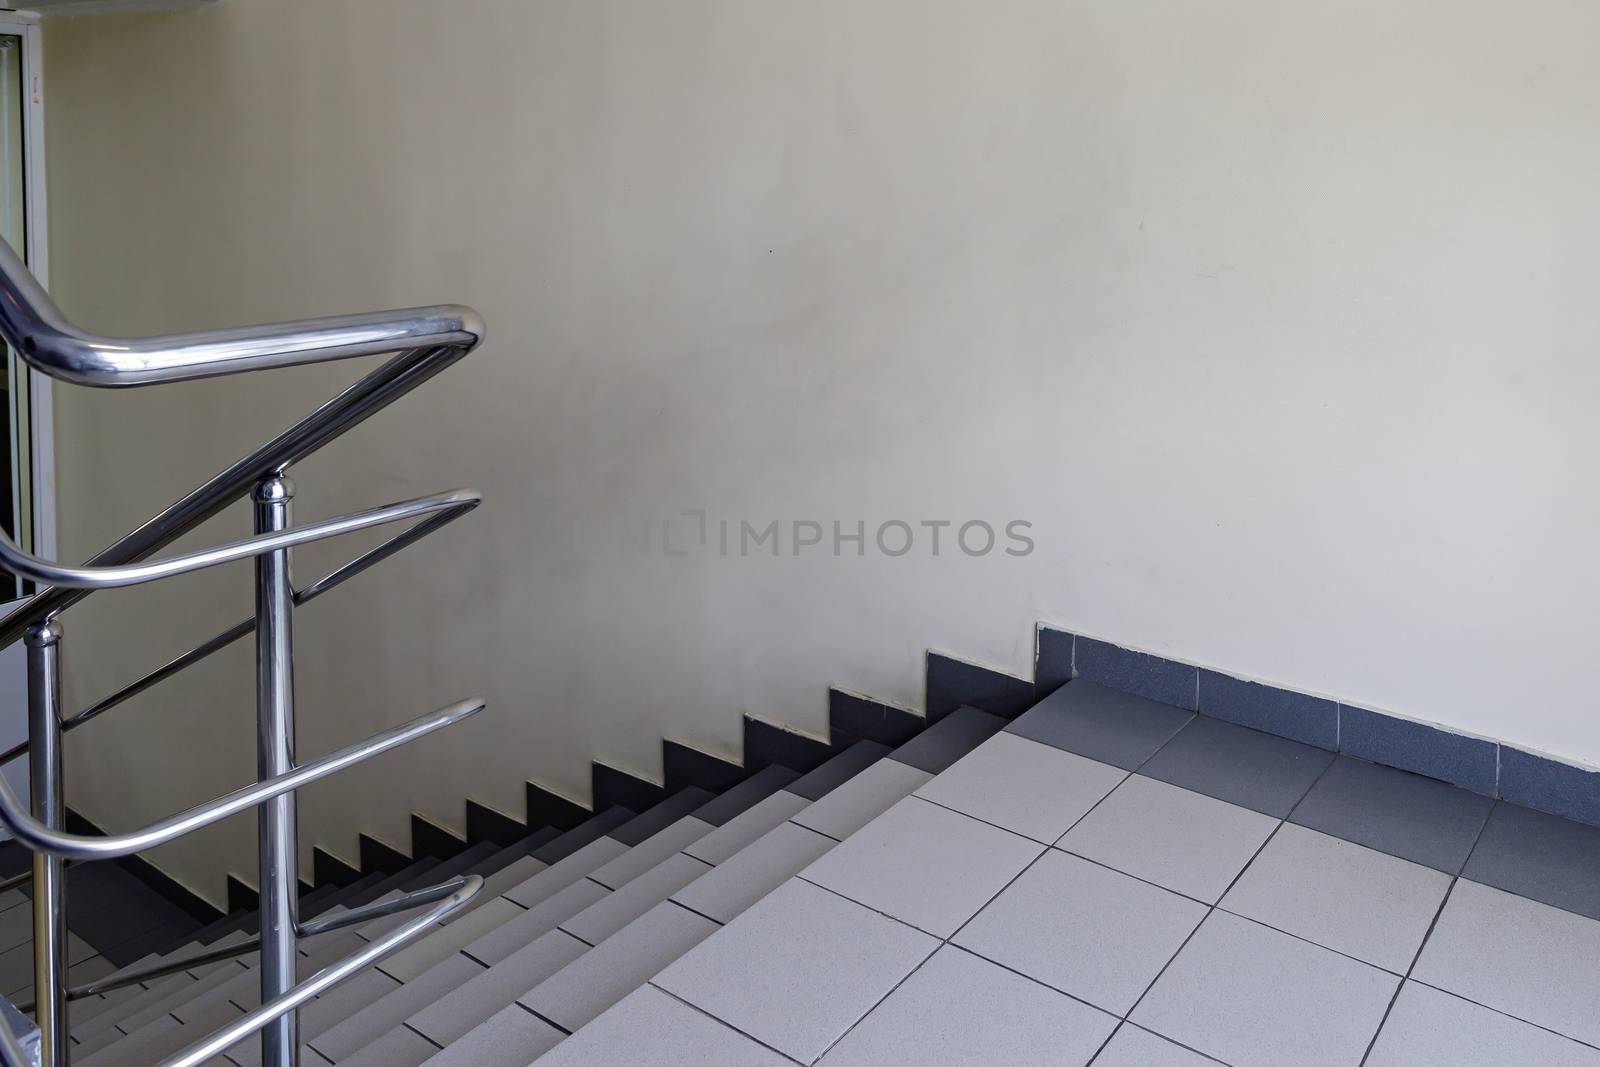 The interior staircase between floors in high-rise building by bonilook